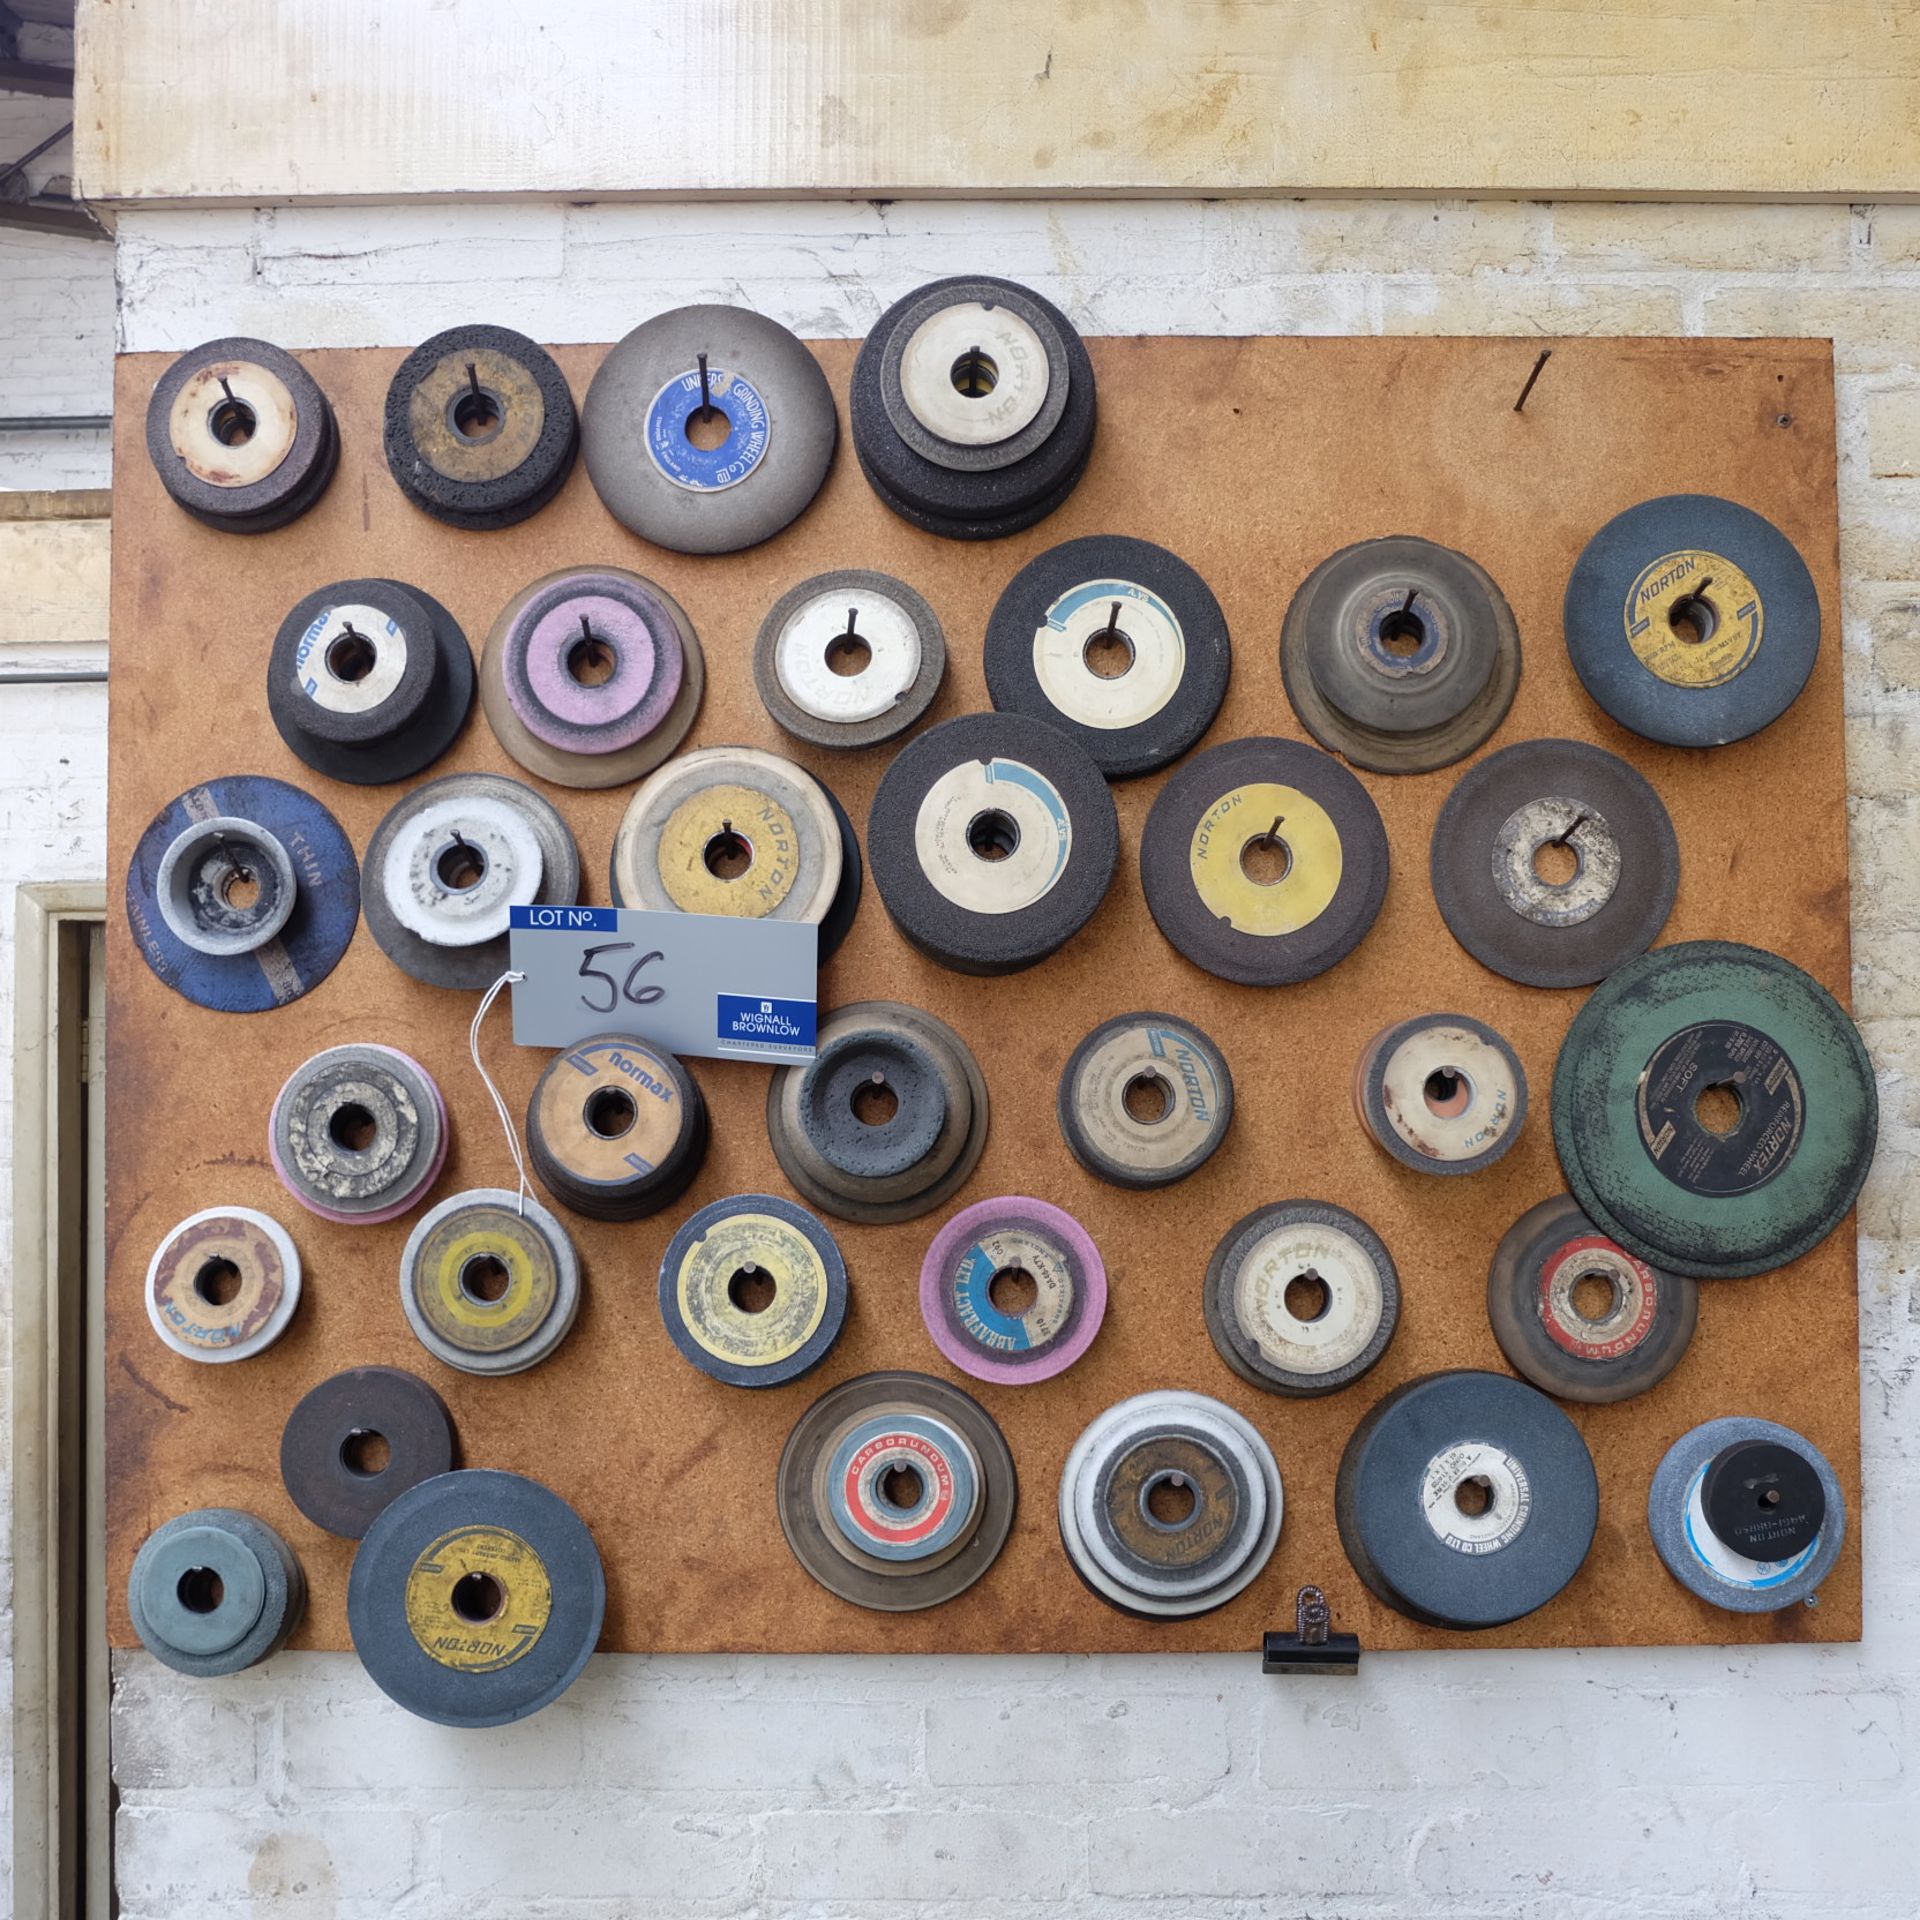 Assorted Used Grinding Wheels on wall rack and bench.